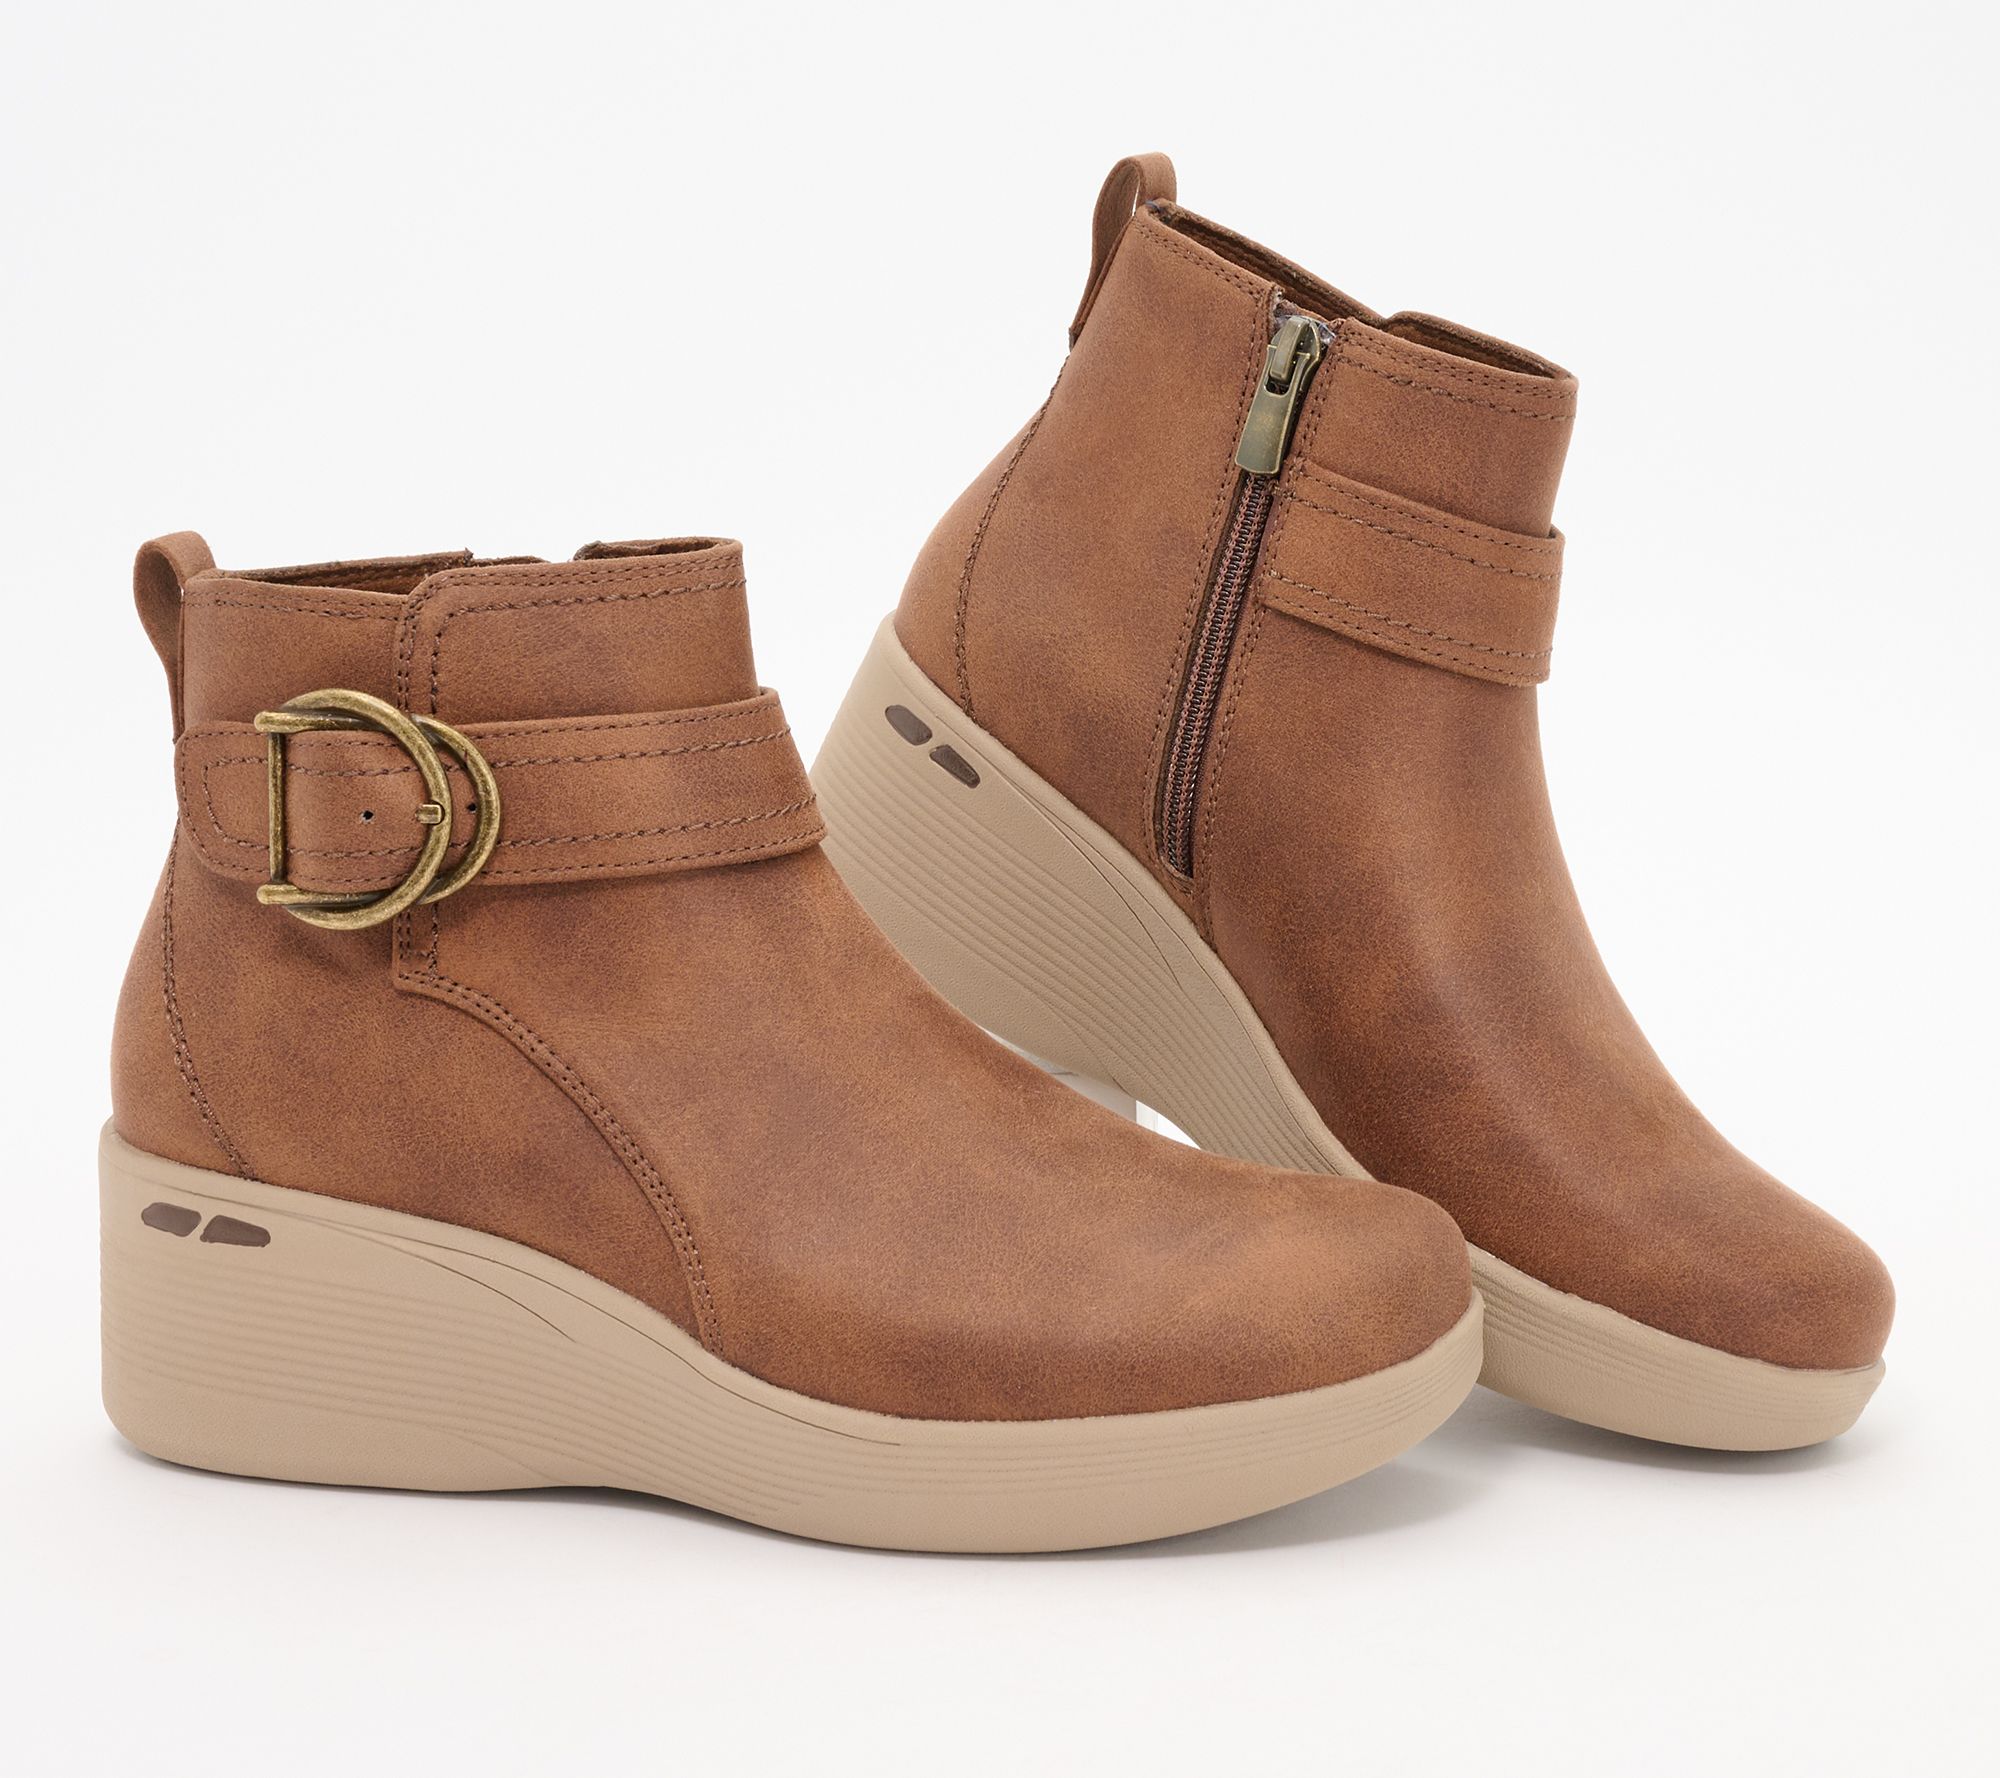 Skechers Ankle Boots - Forever Chic - Forever Chic - QVC.com